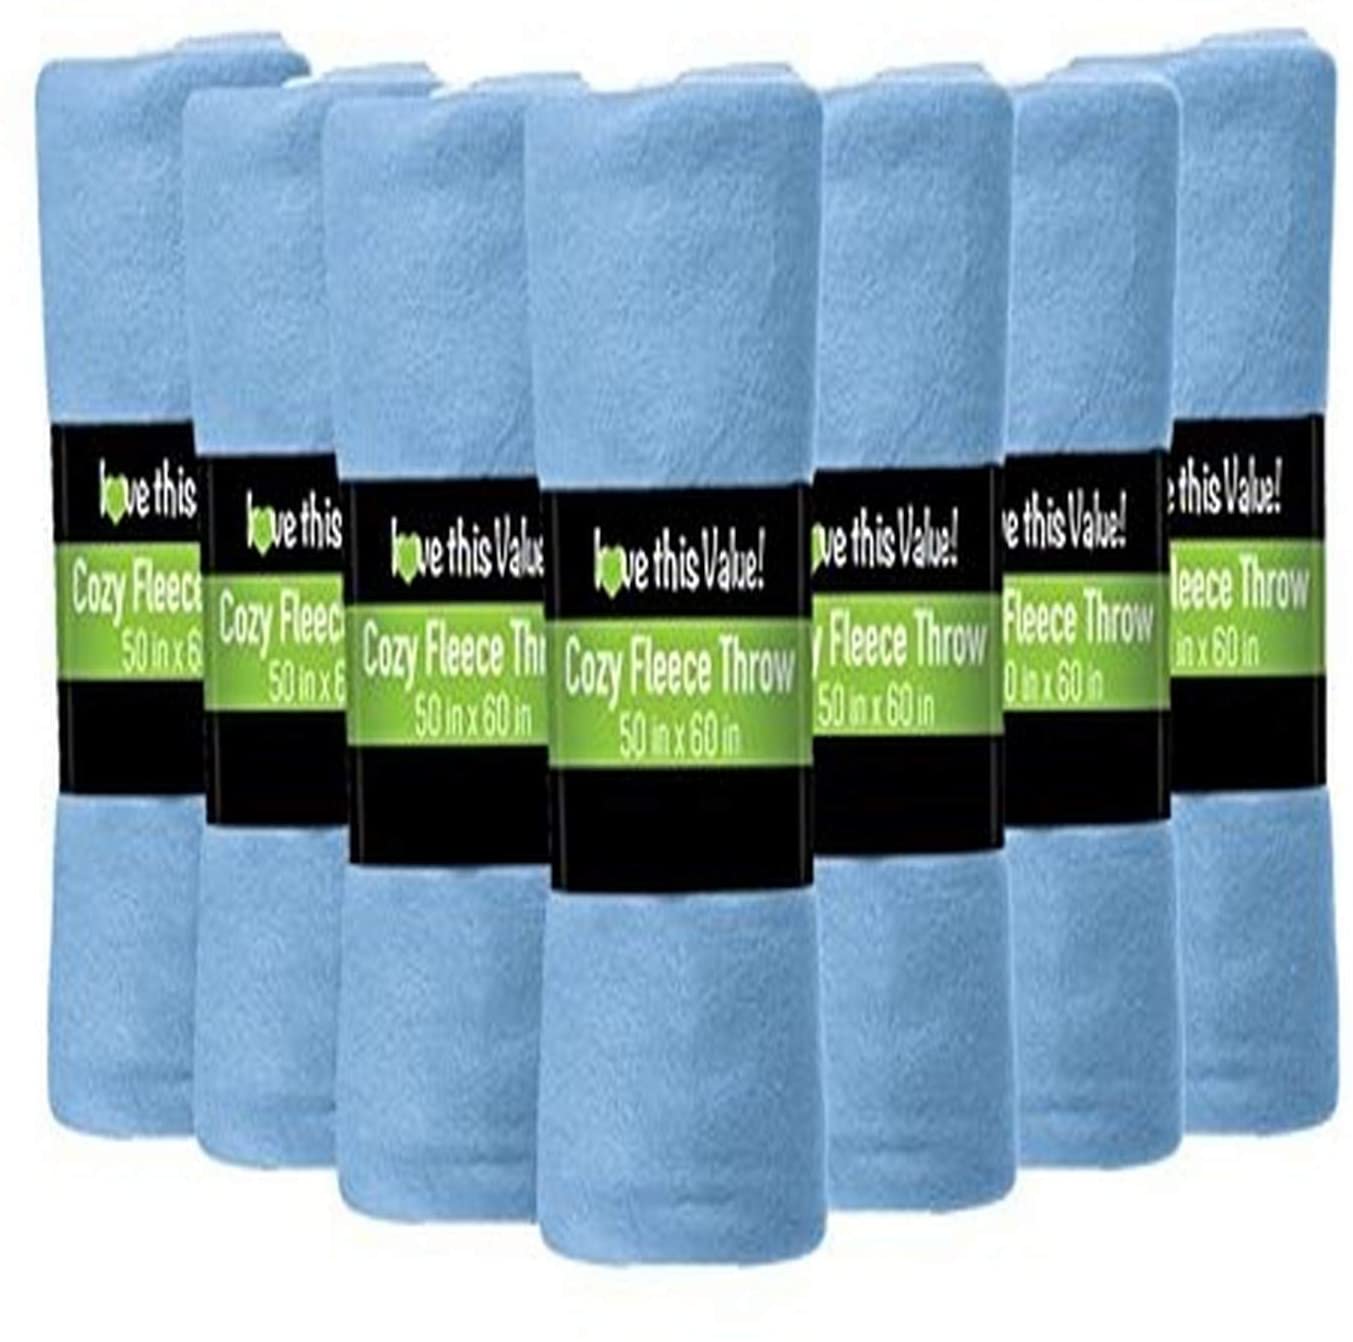 12 Pack Wholesale Soft Comfy Fleece Blankets 60 x 50 Cozy Throw Blankets Brown